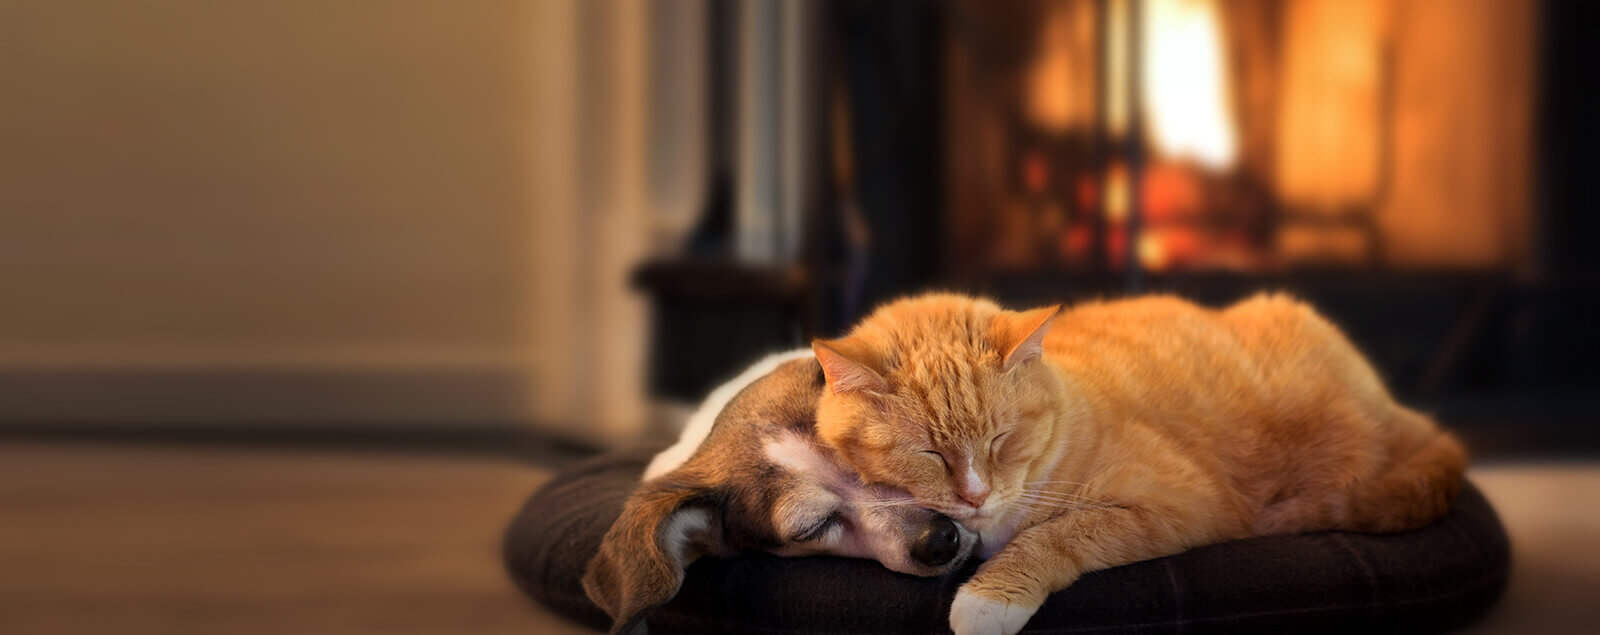 Dog and cat sleeping together next to fire